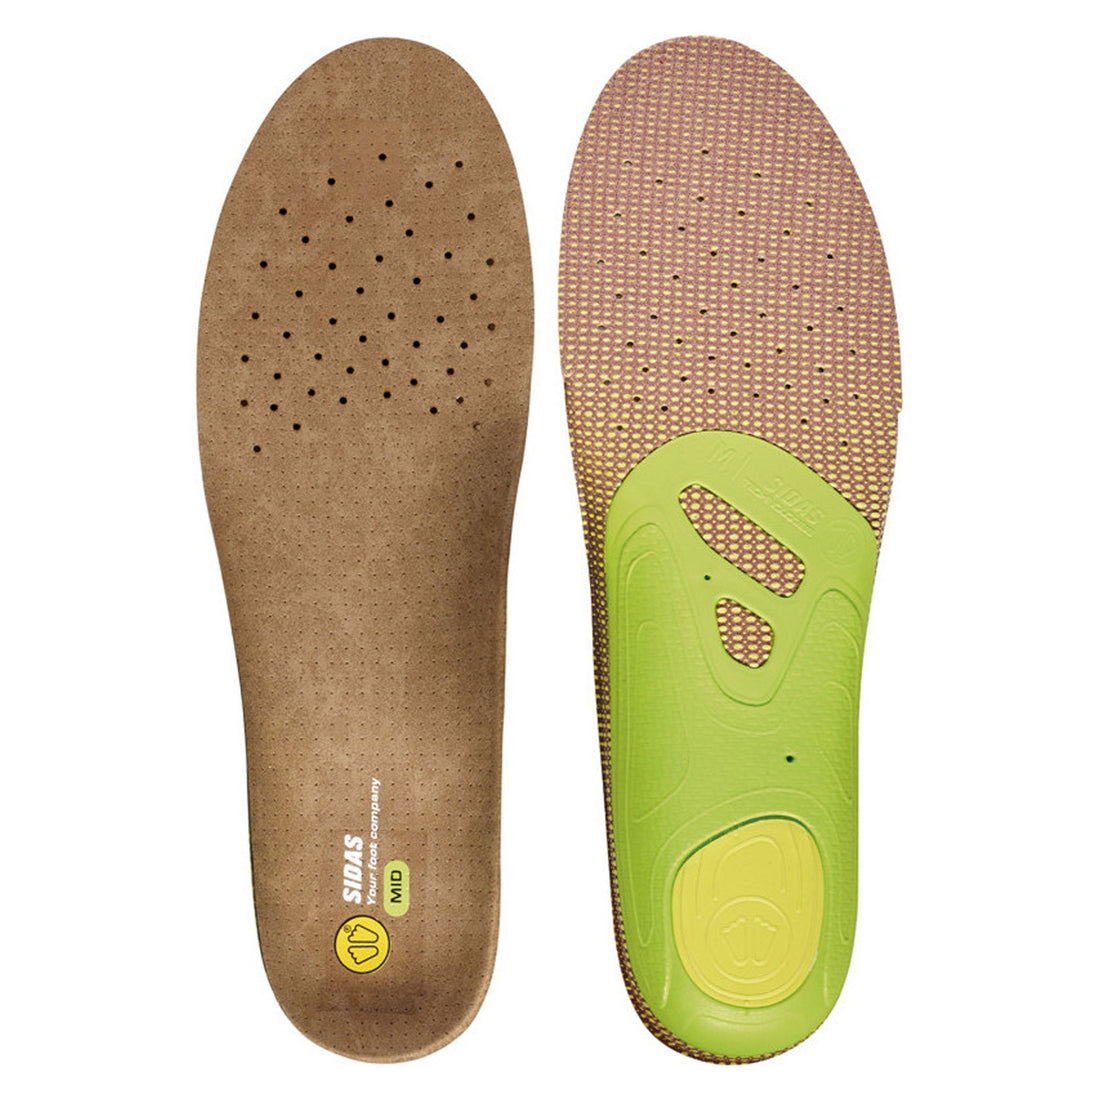 3feet Outdoor Mid Insoles